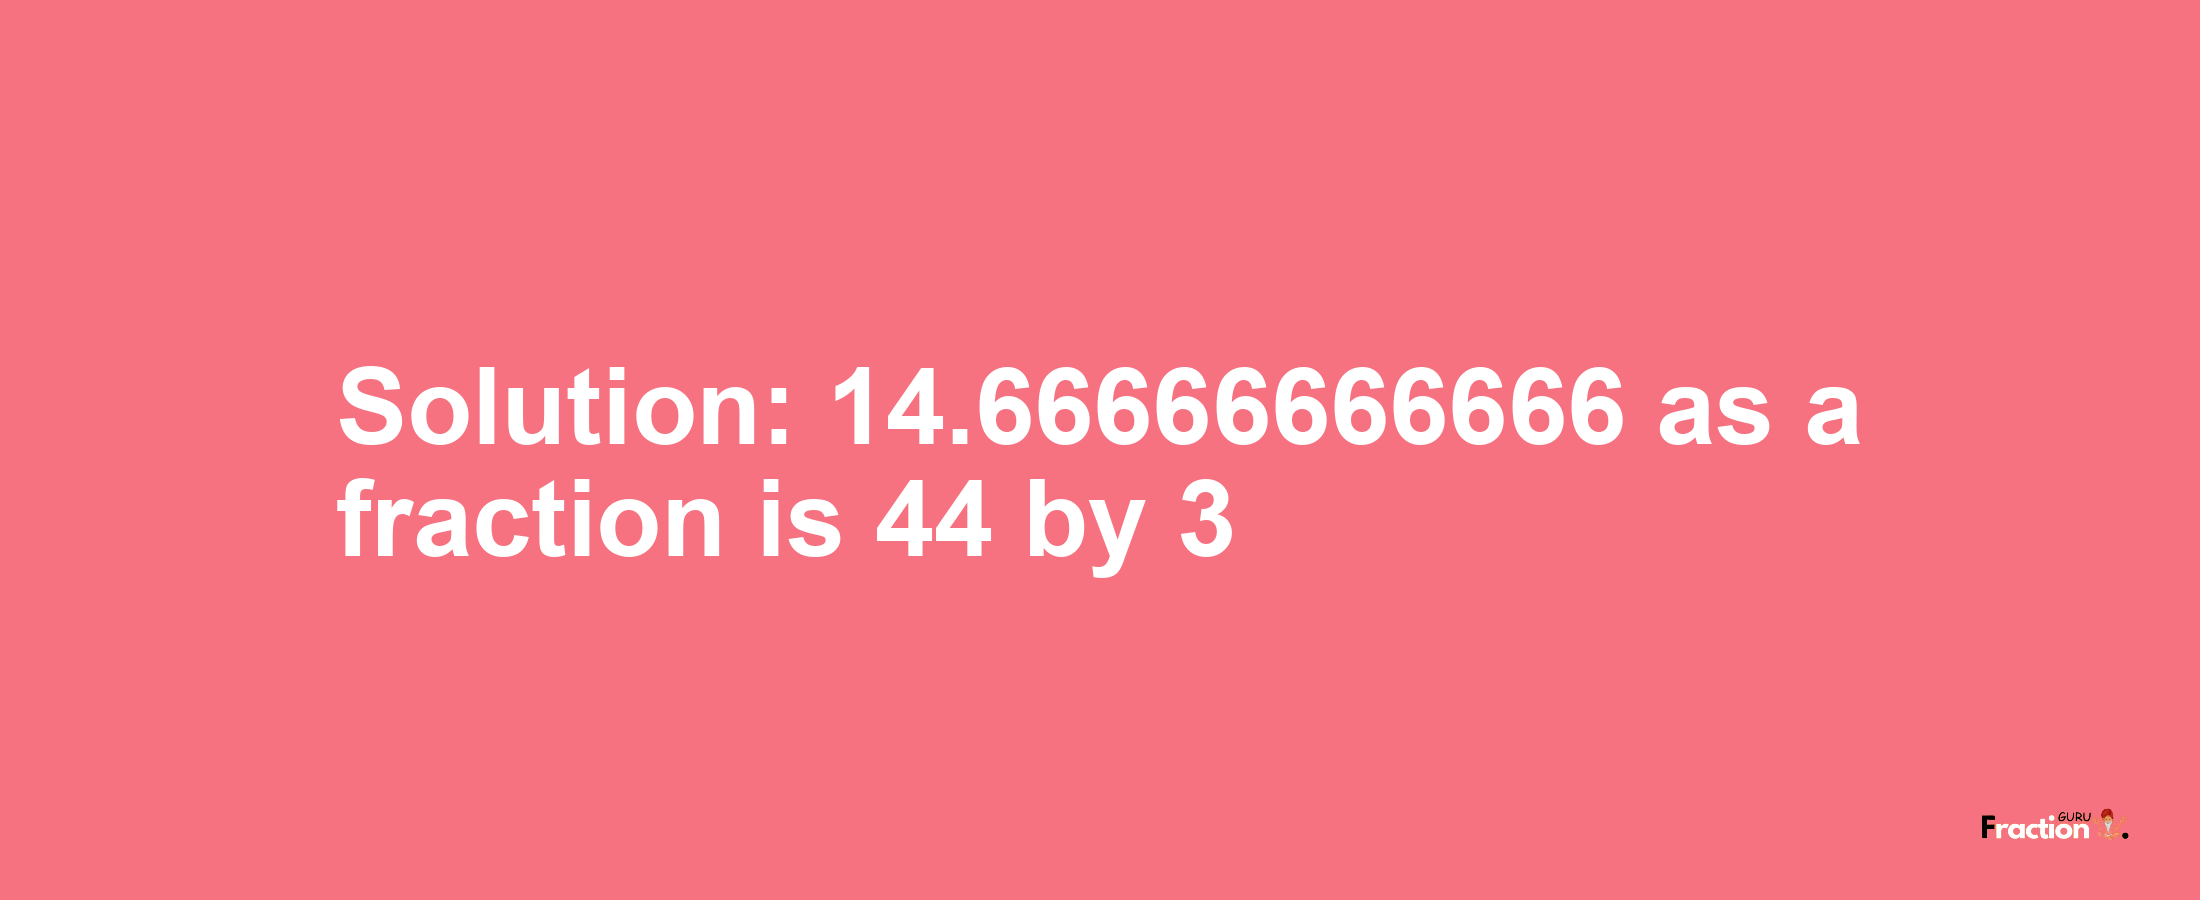 Solution:14.66666666666 as a fraction is 44/3